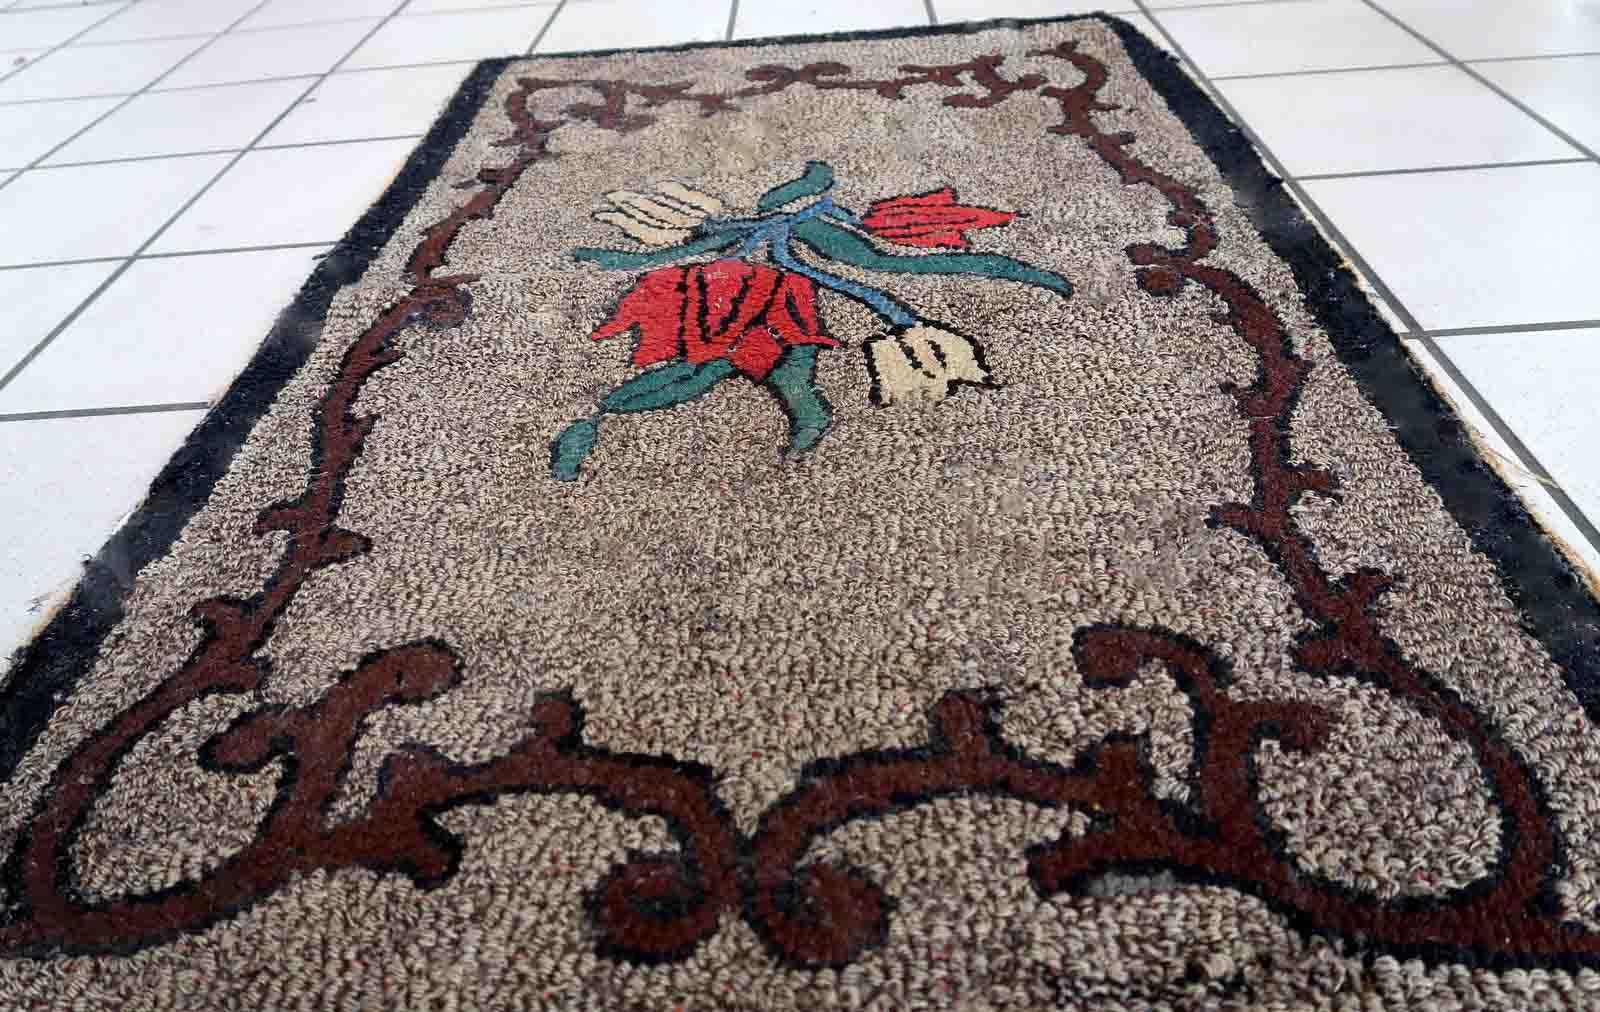 Handmade antique American Hooked rug in floral design. The rug is from the end of 19th century in good condition, the rug has old restorations.

-condition: good, restored,

-circa: 1880s,

-size: 2' x 3.3' (63cm x 101cm),

-material: